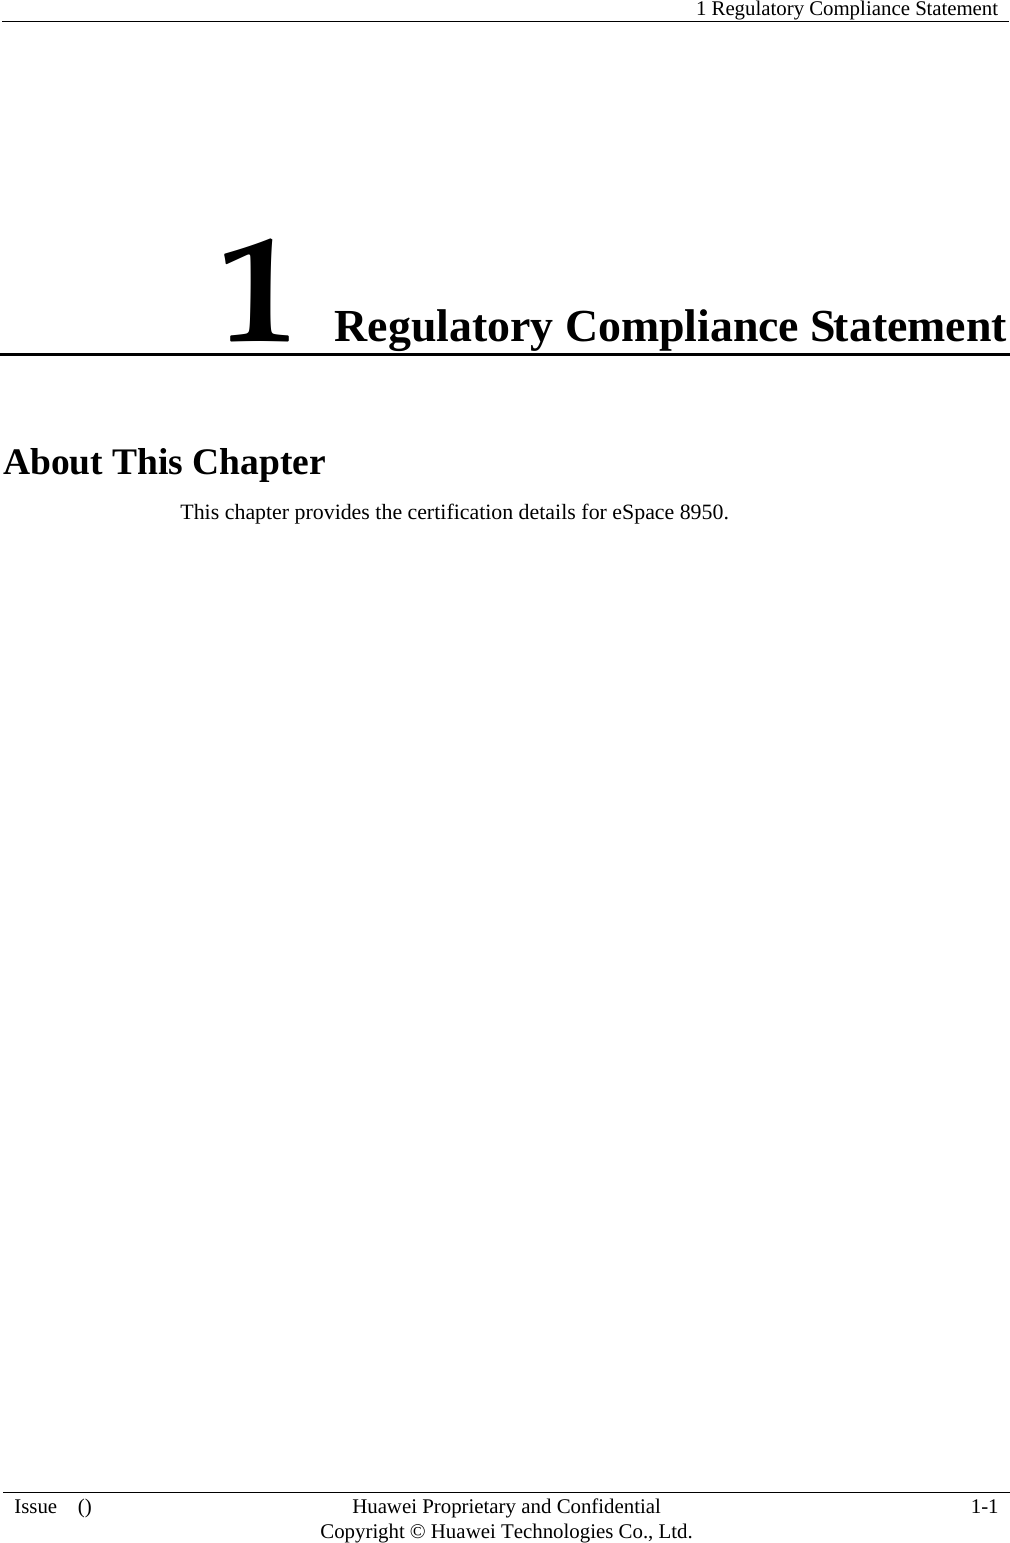   1 Regulatory Compliance Statement  Issue  ()  Huawei Proprietary and Confidential     Copyright © Huawei Technologies Co., Ltd. 1-1 1 Regulatory Compliance Statement About This Chapter This chapter provides the certification details for eSpace 8950.  